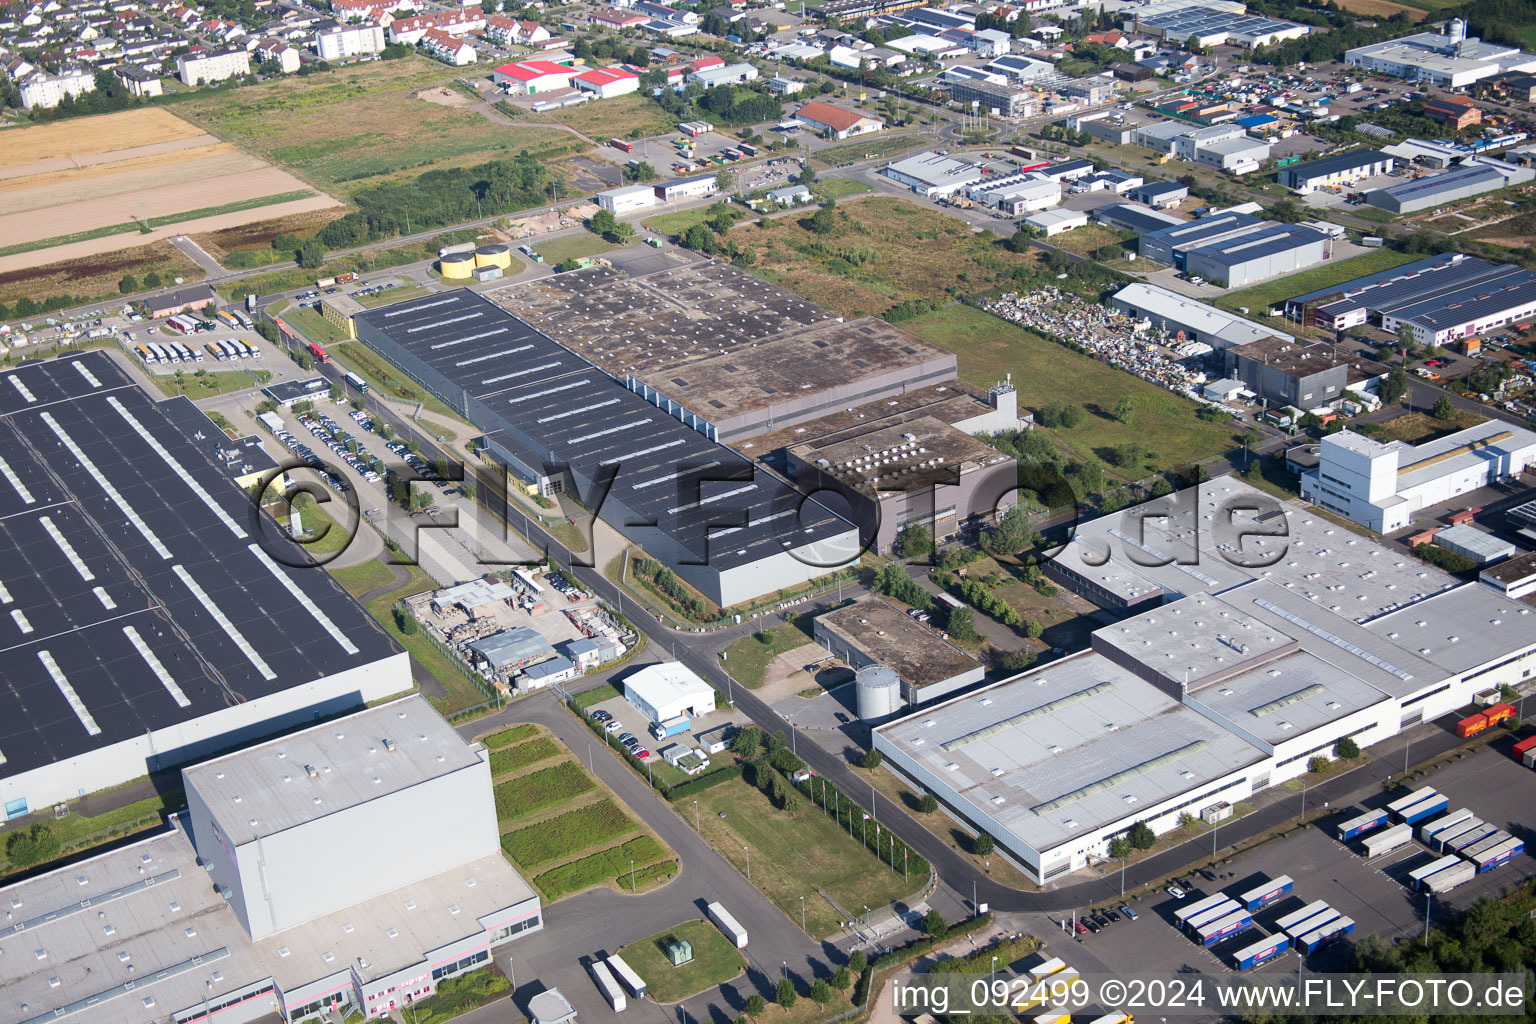 Bird's eye view of Industrial Estate in Offenbach an der Queich in the state Rhineland-Palatinate, Germany